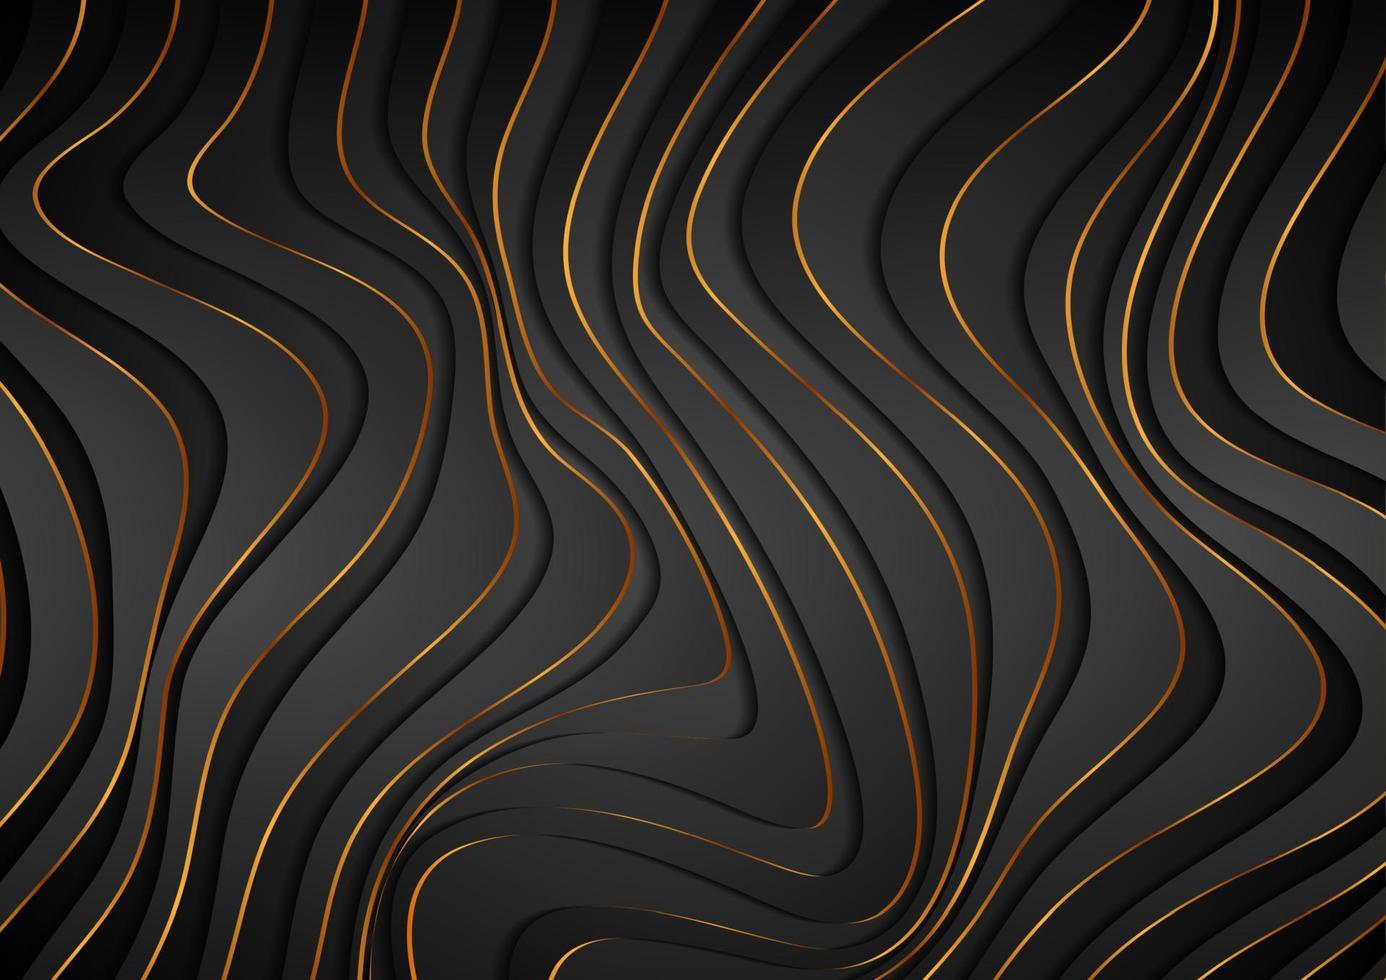 Black and golden curved waves abstract luxury background vector